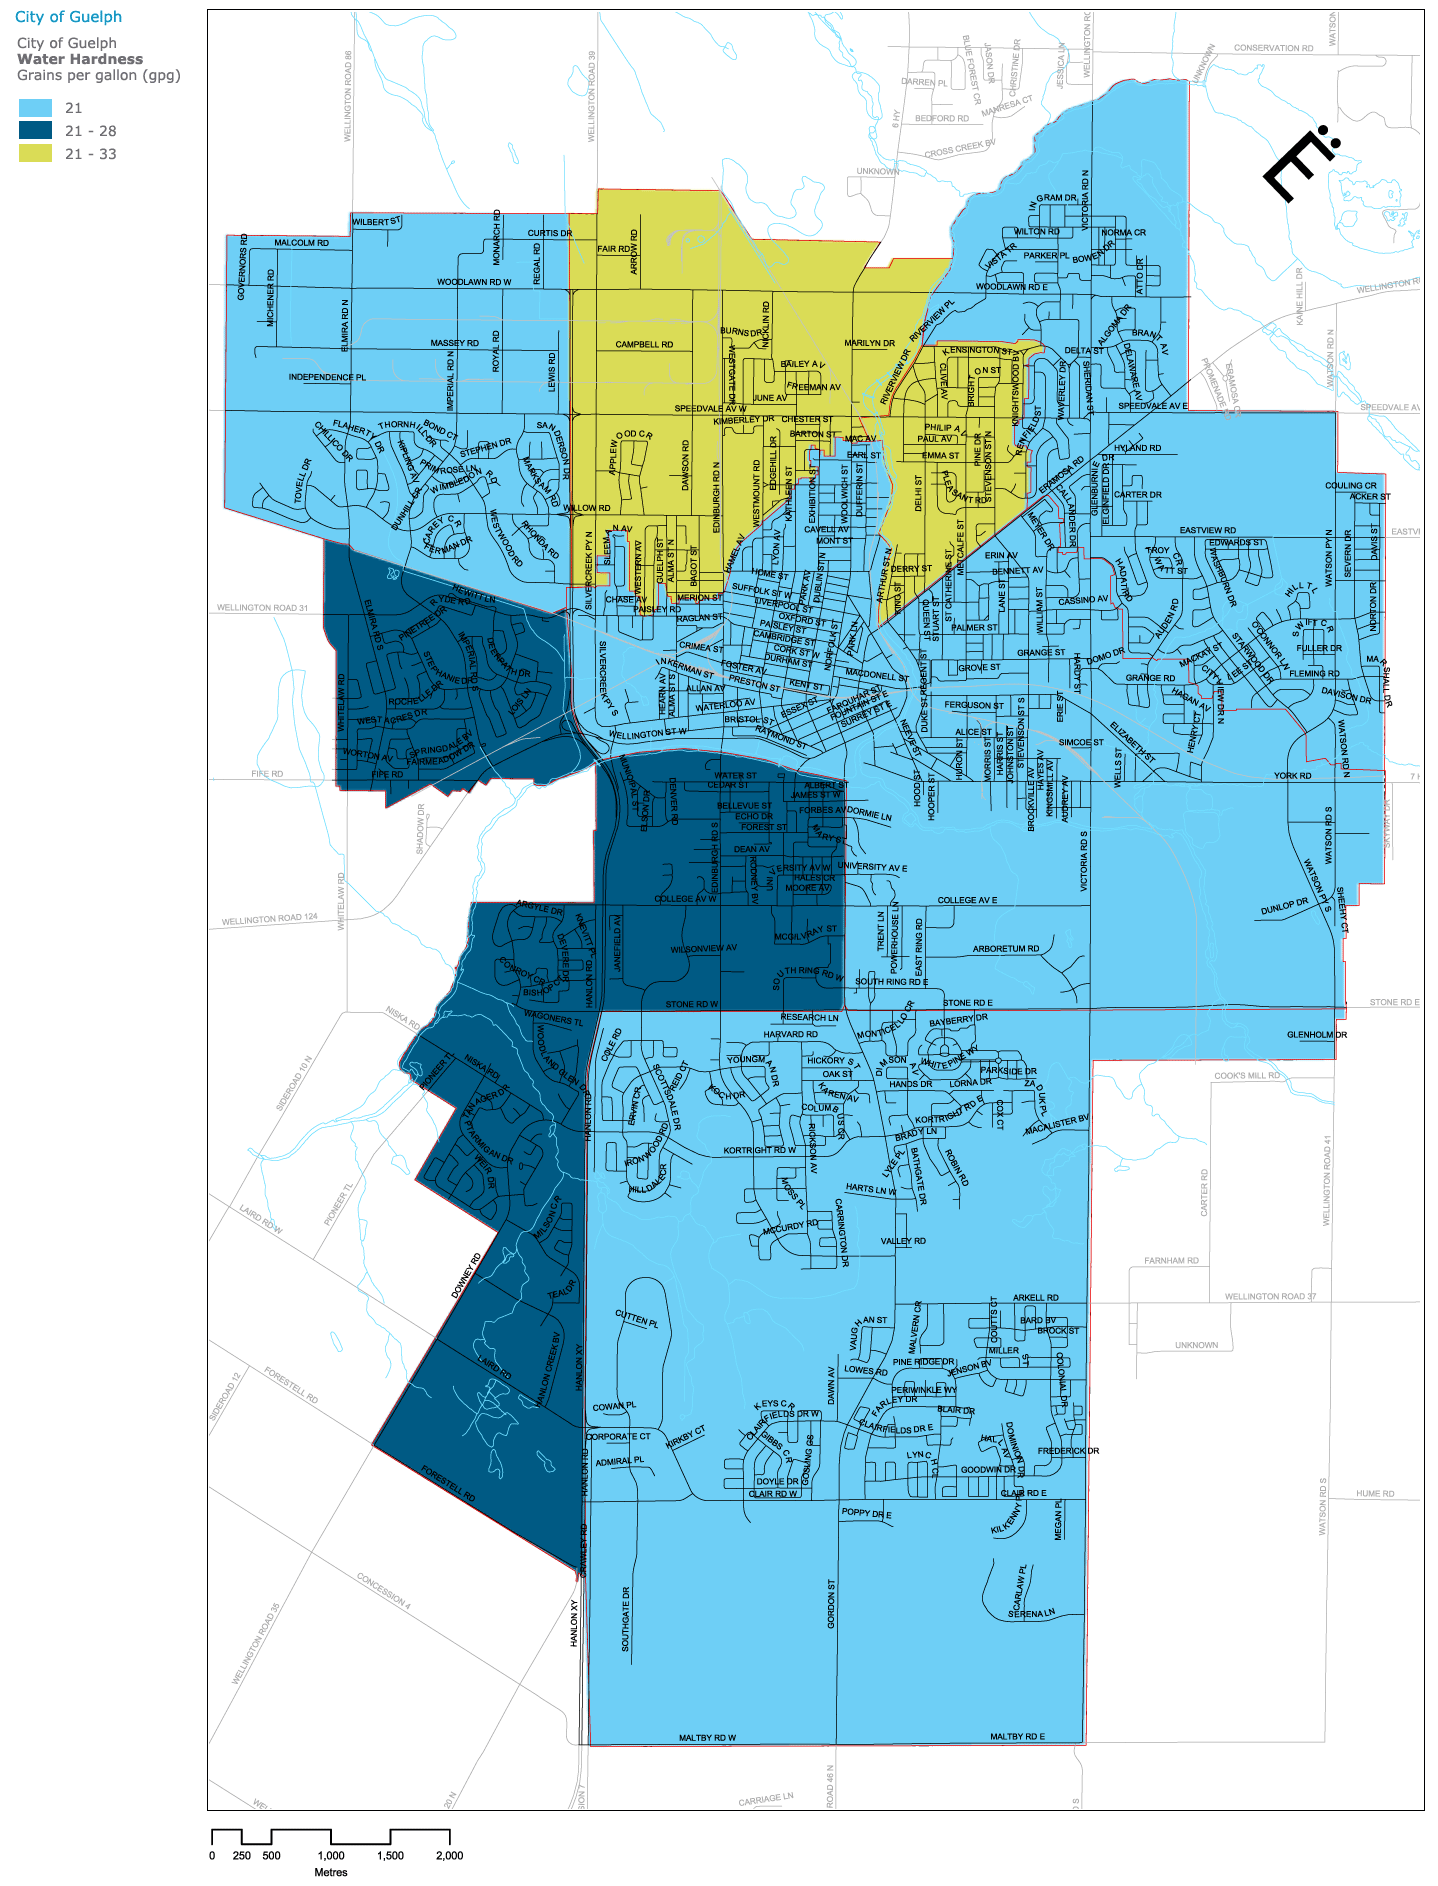 City of Guelph - Water Hardness Map